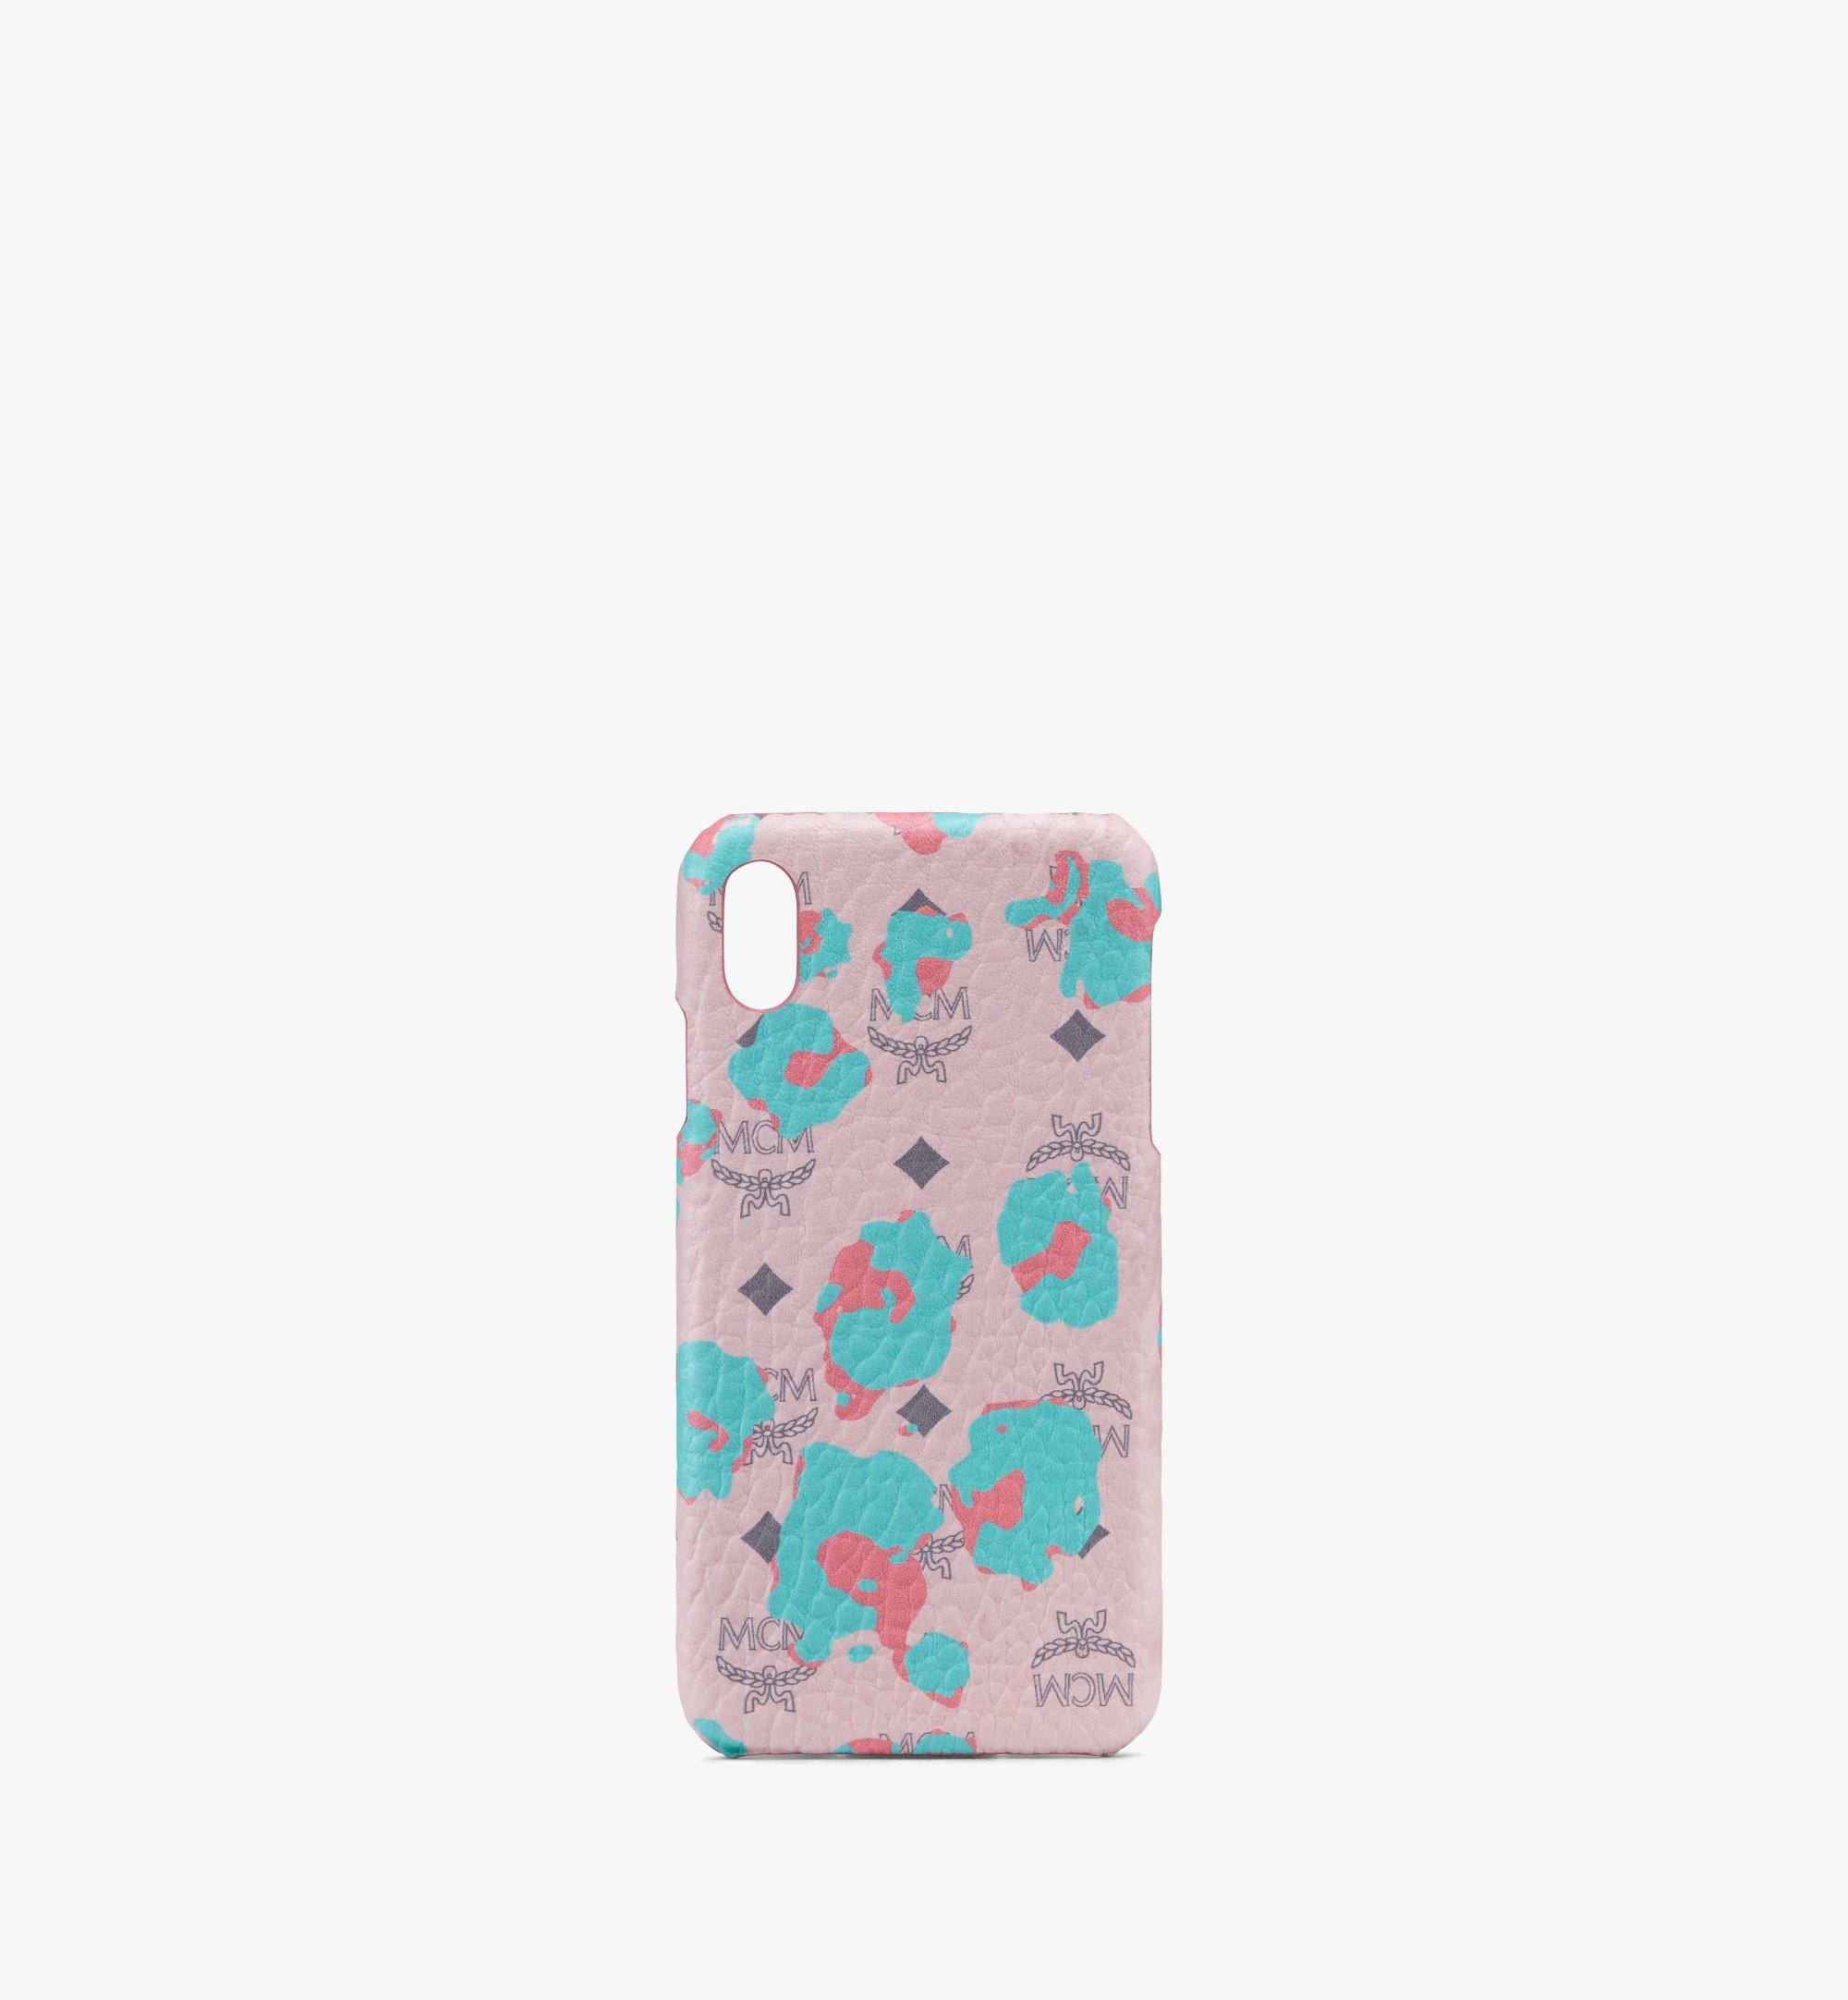 One Size iPhone XS Max Case in Floral Leopard Pink | MCM ®CA